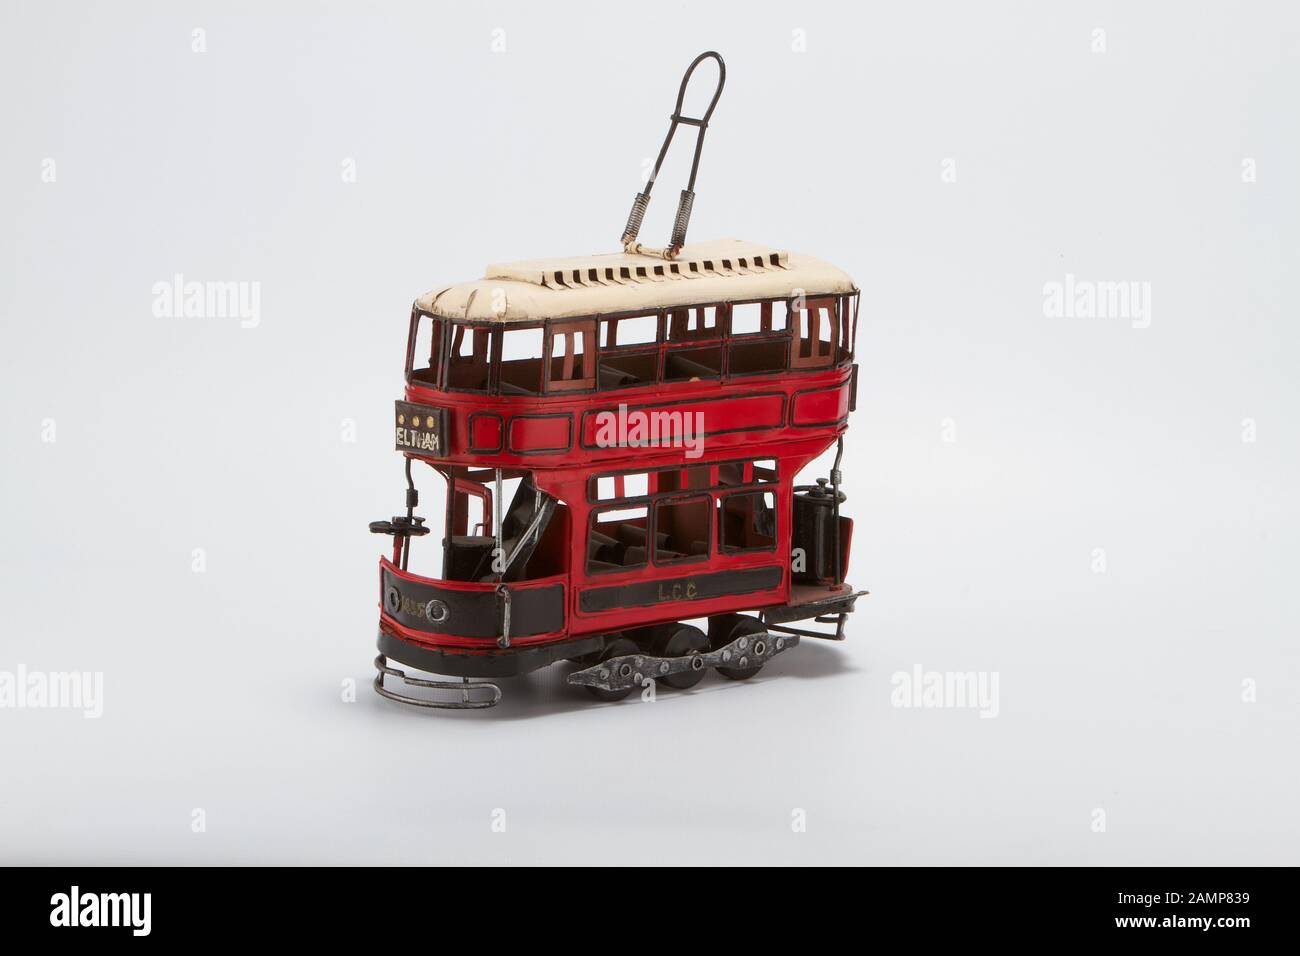 Antique, Bus, Cable Car, Childhood, Clipping Path, Coach Bus, Commercial Land Vehicle, Electric Train, European Culture, Green, History, Horizontal, I Stock Photo